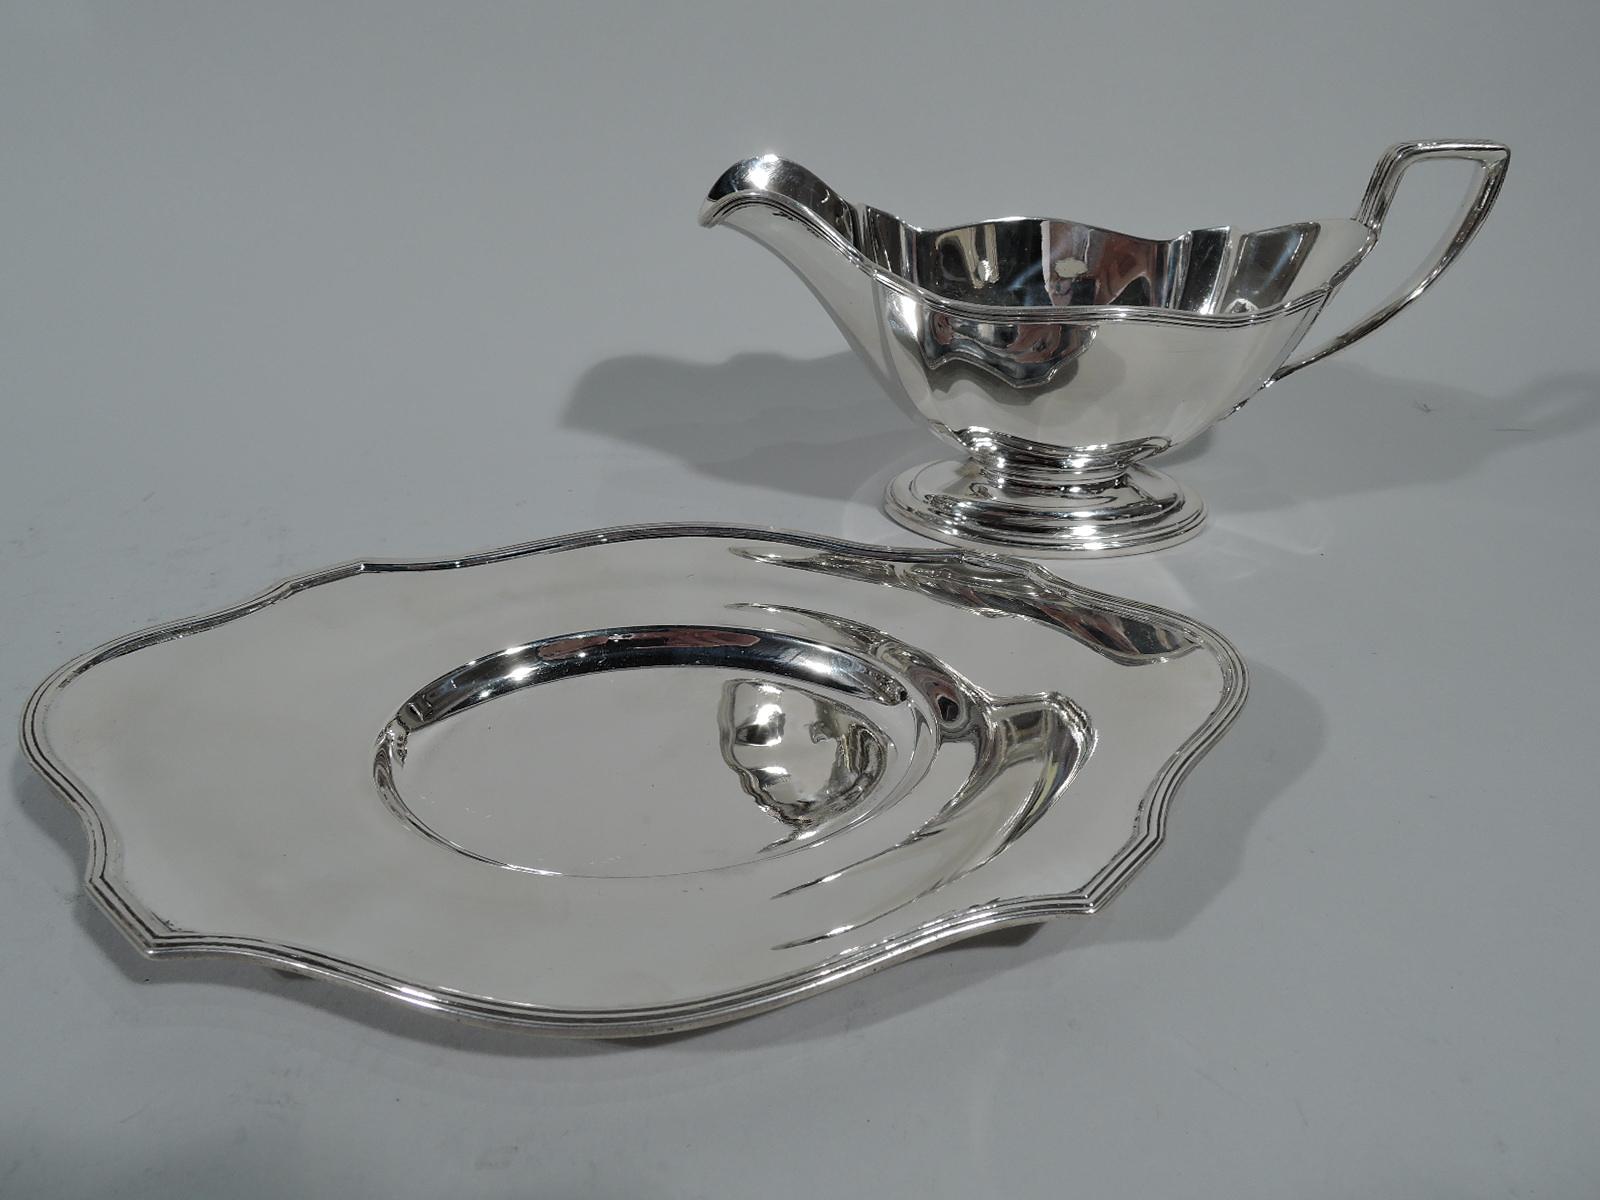 Sterling silver sauceboat on stand in Plymouth pattern. Made by Gorham in Providence in 1907. Sauceboat: Reeded helmet mouth, reeded scroll bracket handle with foliate mounts, and oval stepped foot. Date June 10, 1908 engraved on foot underside.